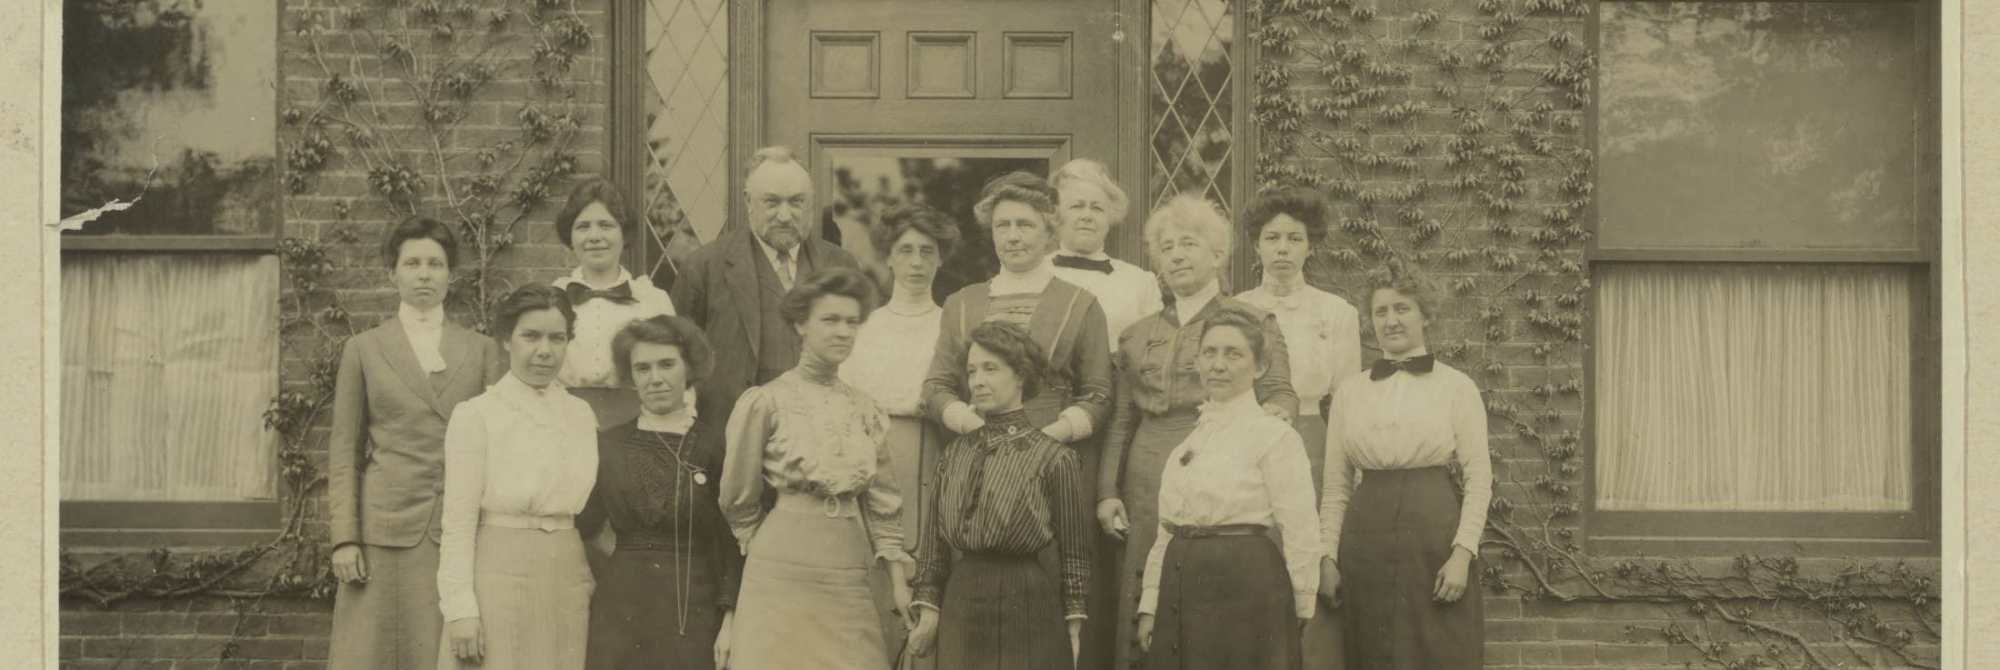 a black and white image of a group of women in the 20th century who are a class of female astronomers at harvard